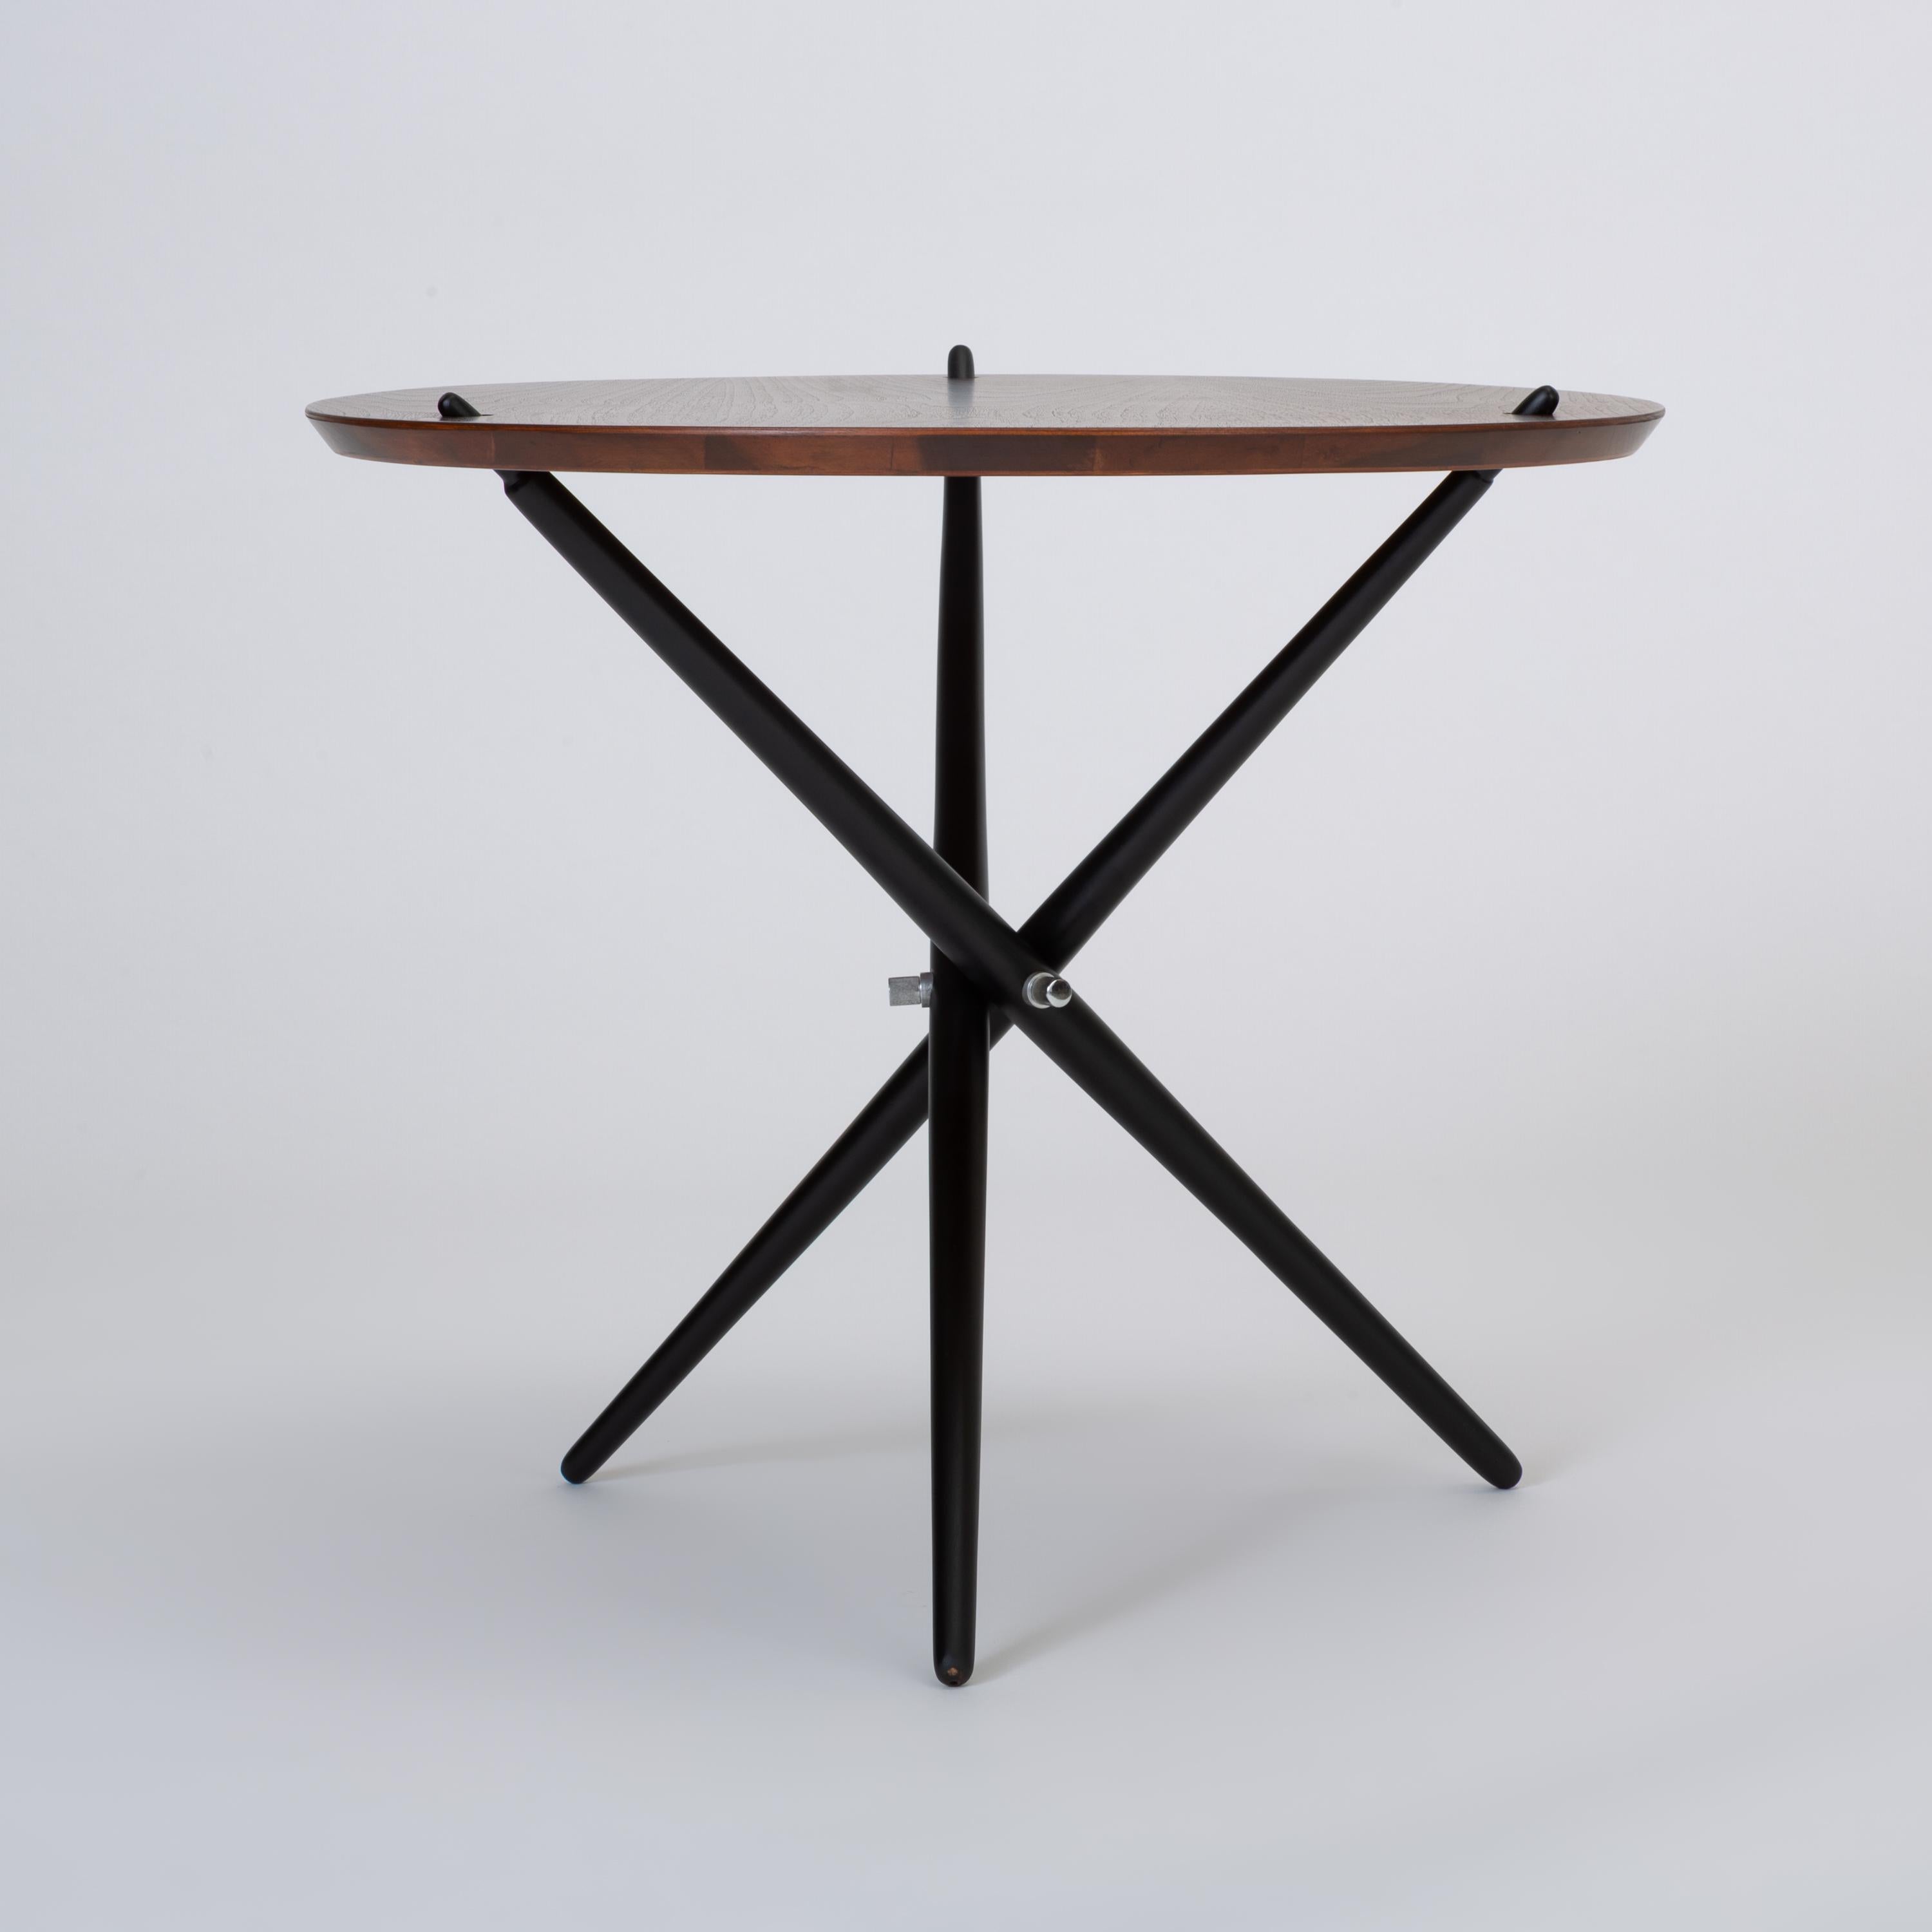 Designed by Hans Bellman for Swiss retailer Wohnbedarf, the model 103 side table was introduced to the US market in 1948 by Knoll Associates. The small round table features a tripod base of three tapered dowels, painted black and gathered where they